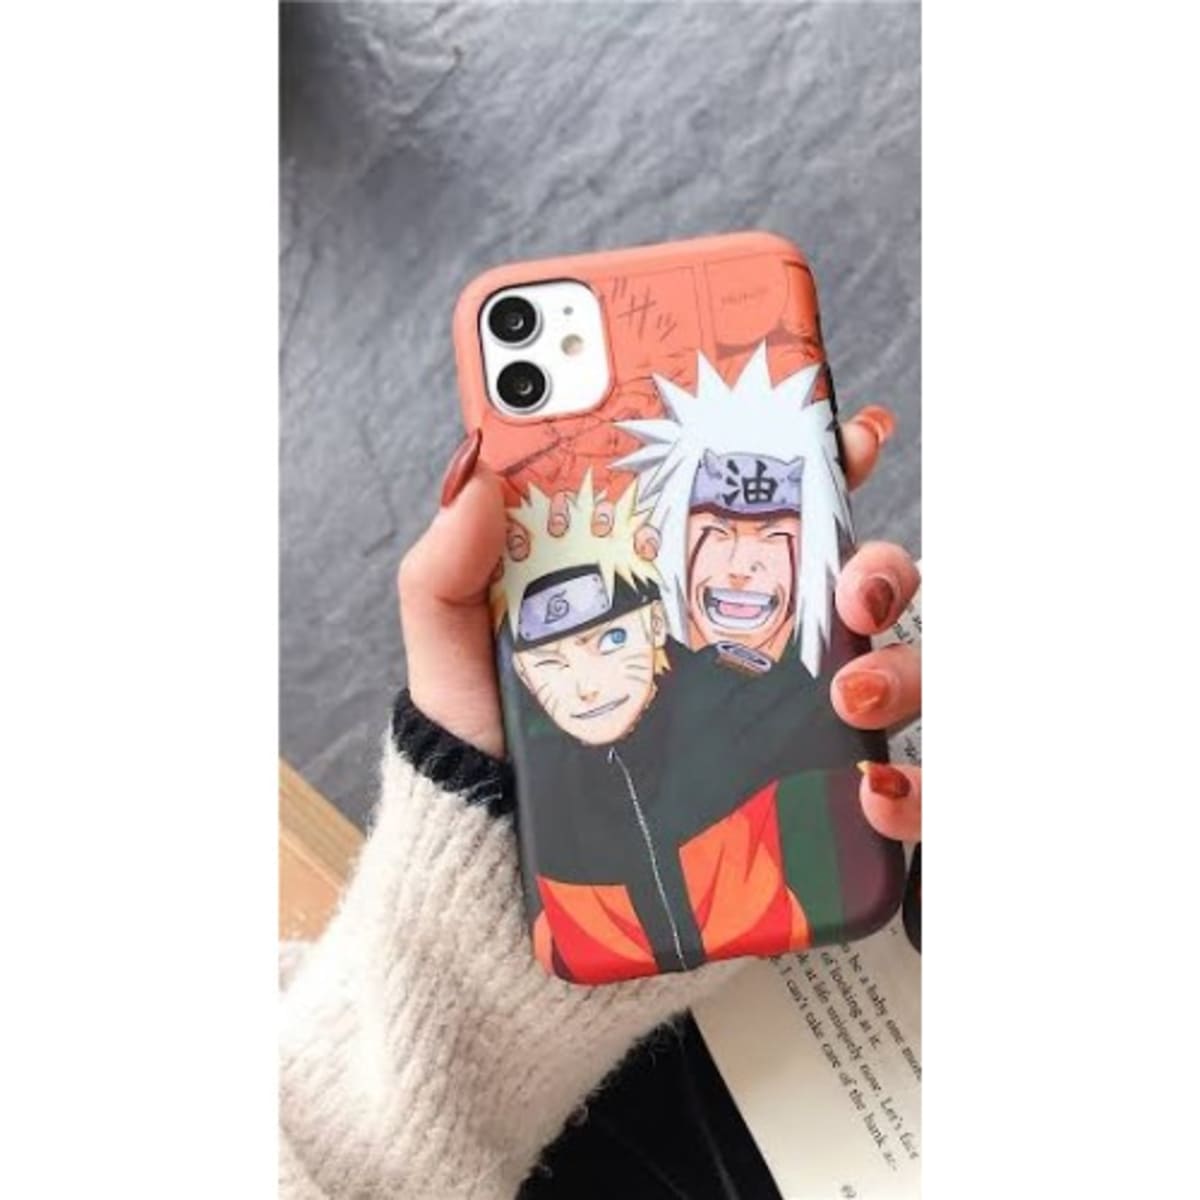 ZERO TWO CUTE DARLING IN FRANXX ANIME iPhone SE 2022 Case Cover